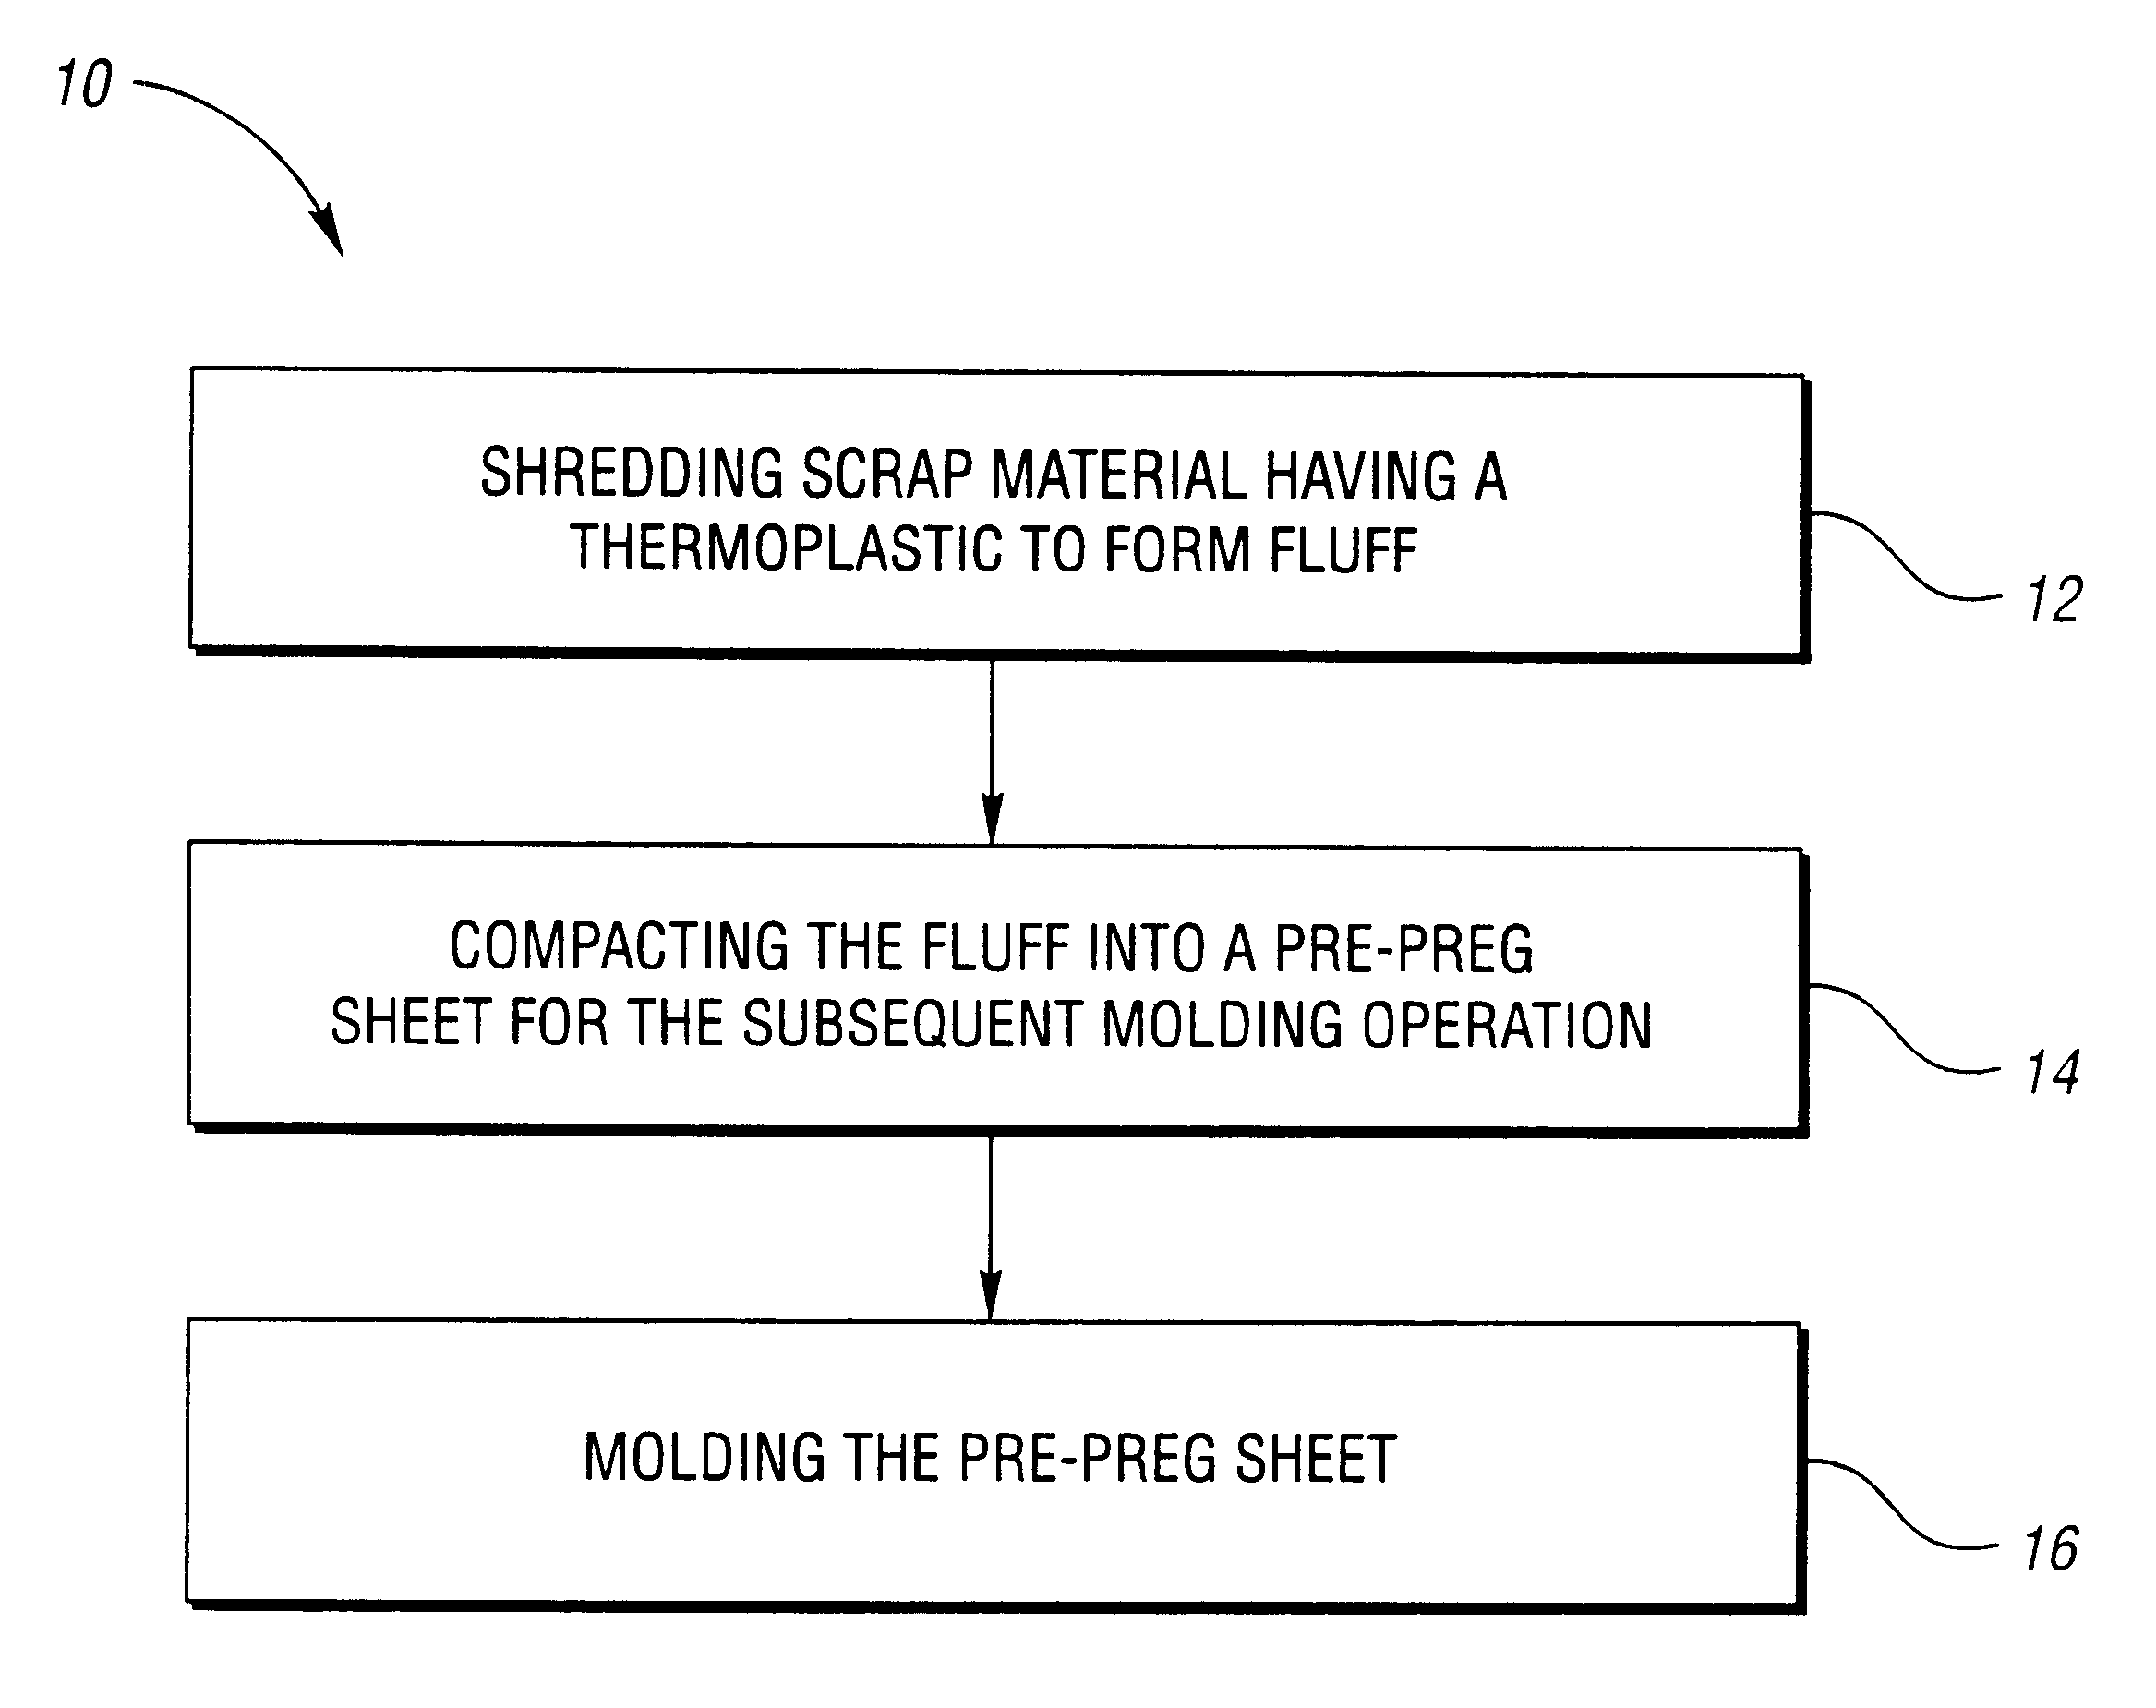 Method of recycling scrap material containing a thermoplastic